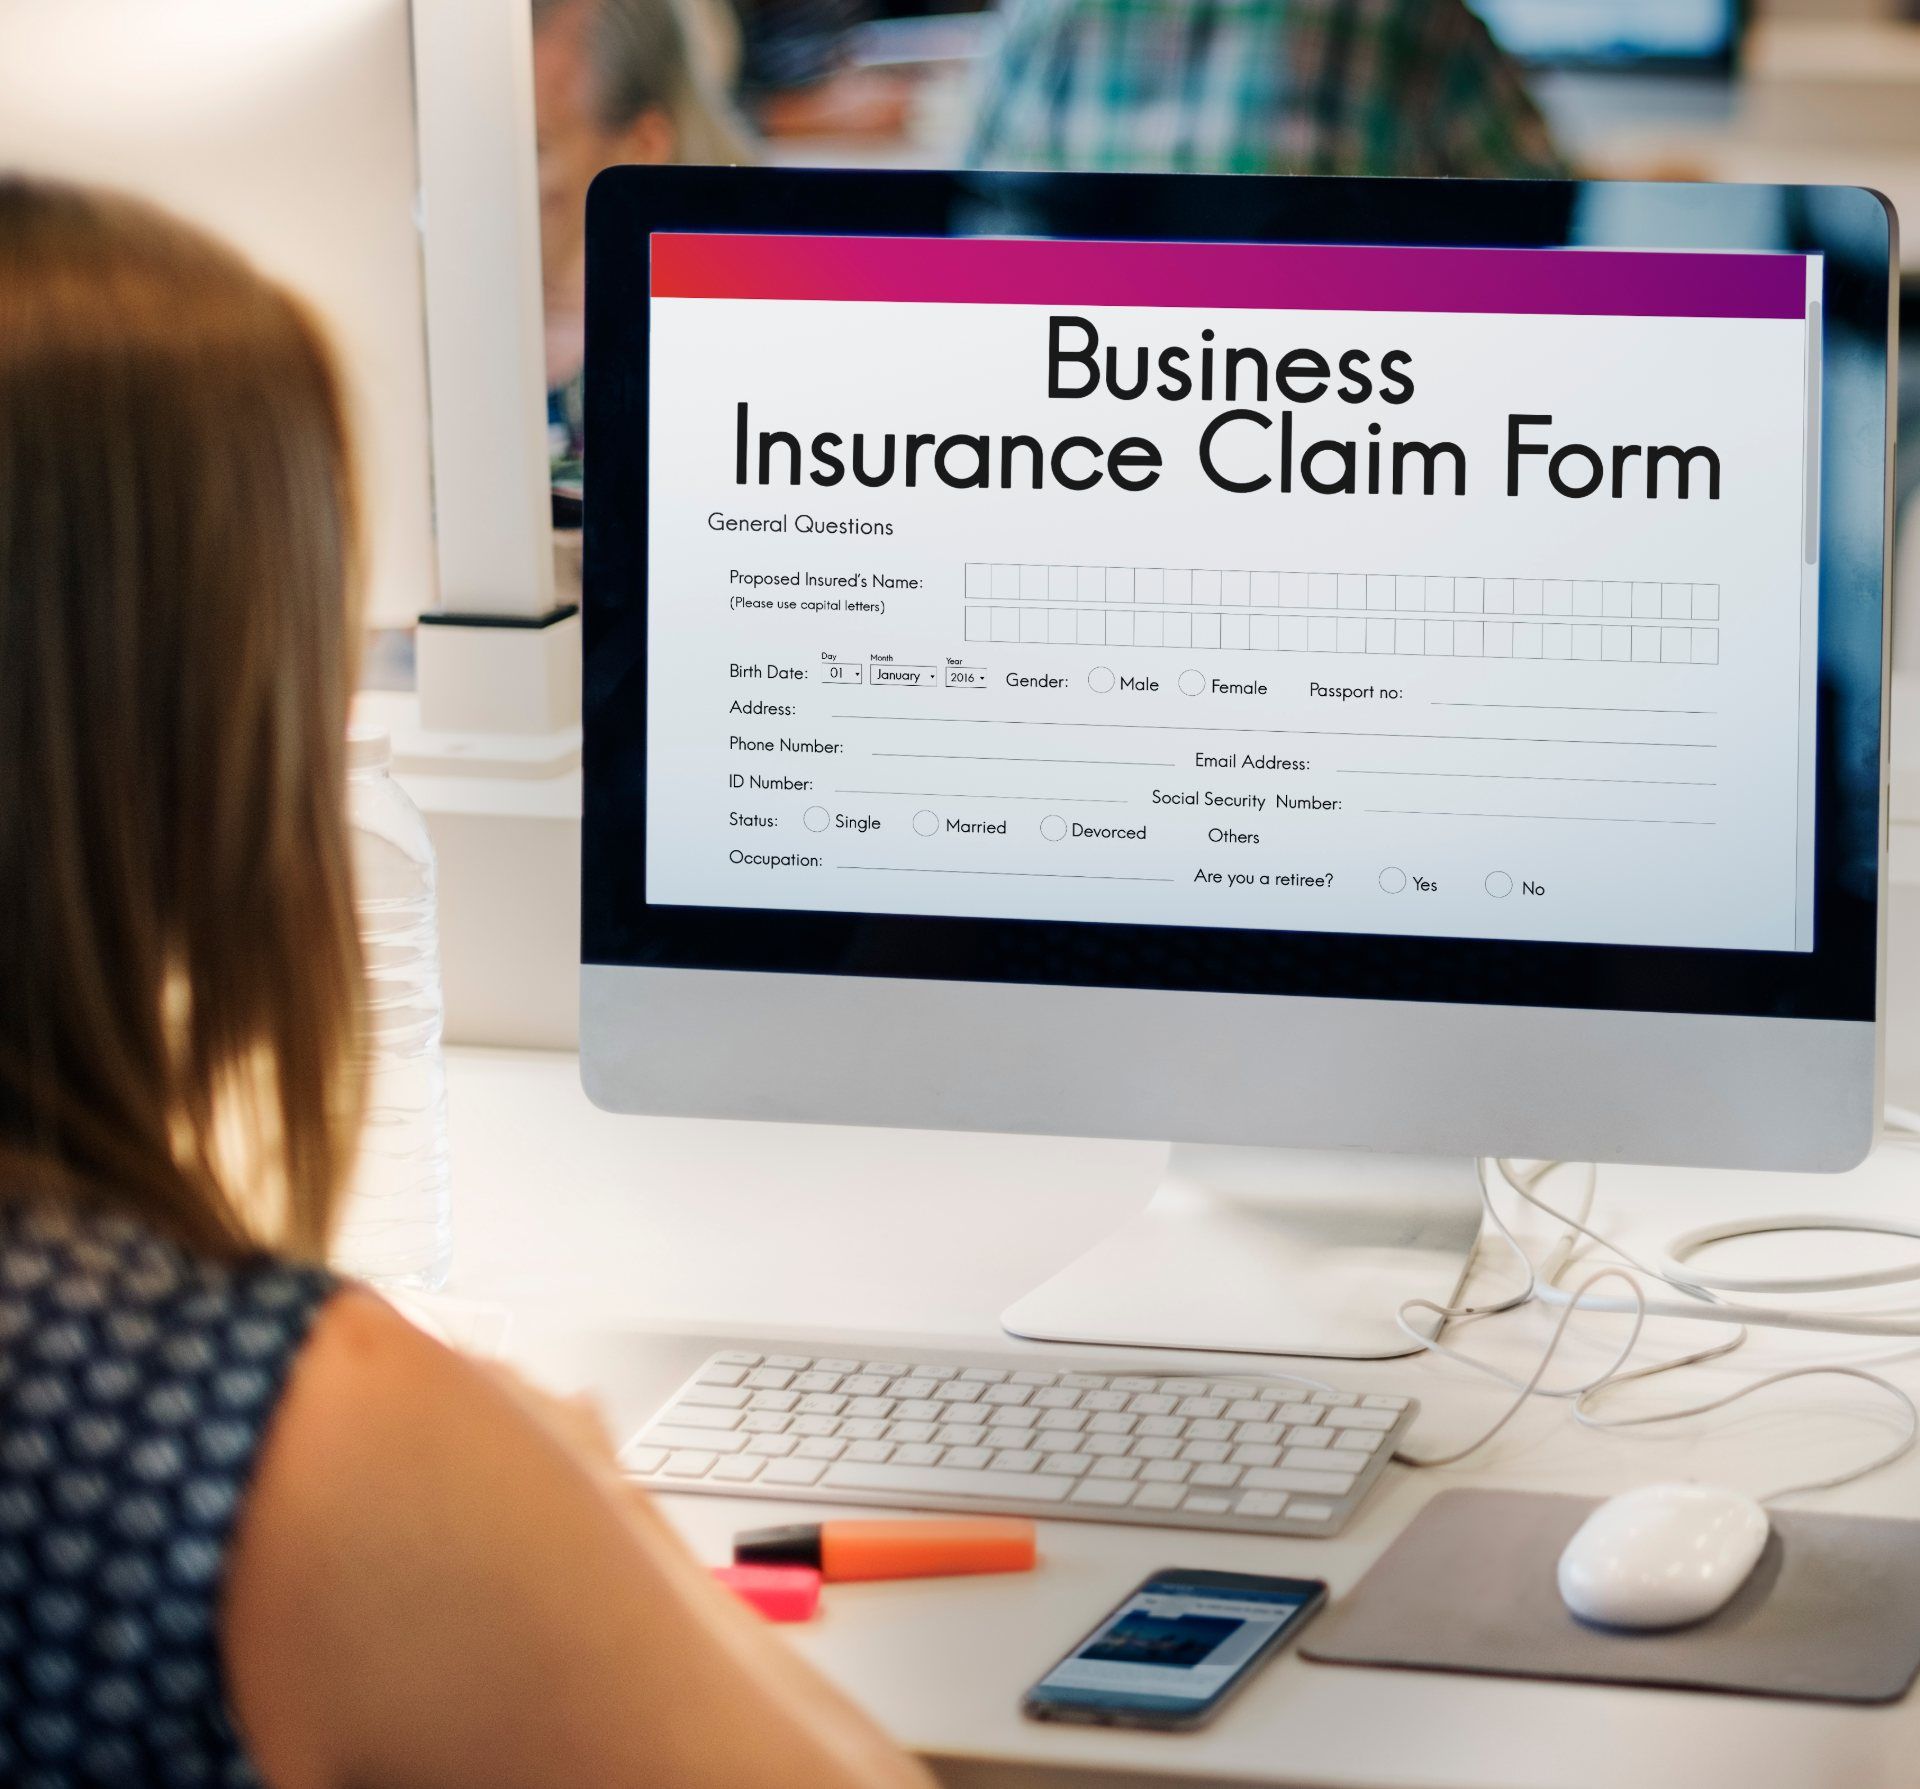 Woman uses computer to file business insurance claim form - Business interruption